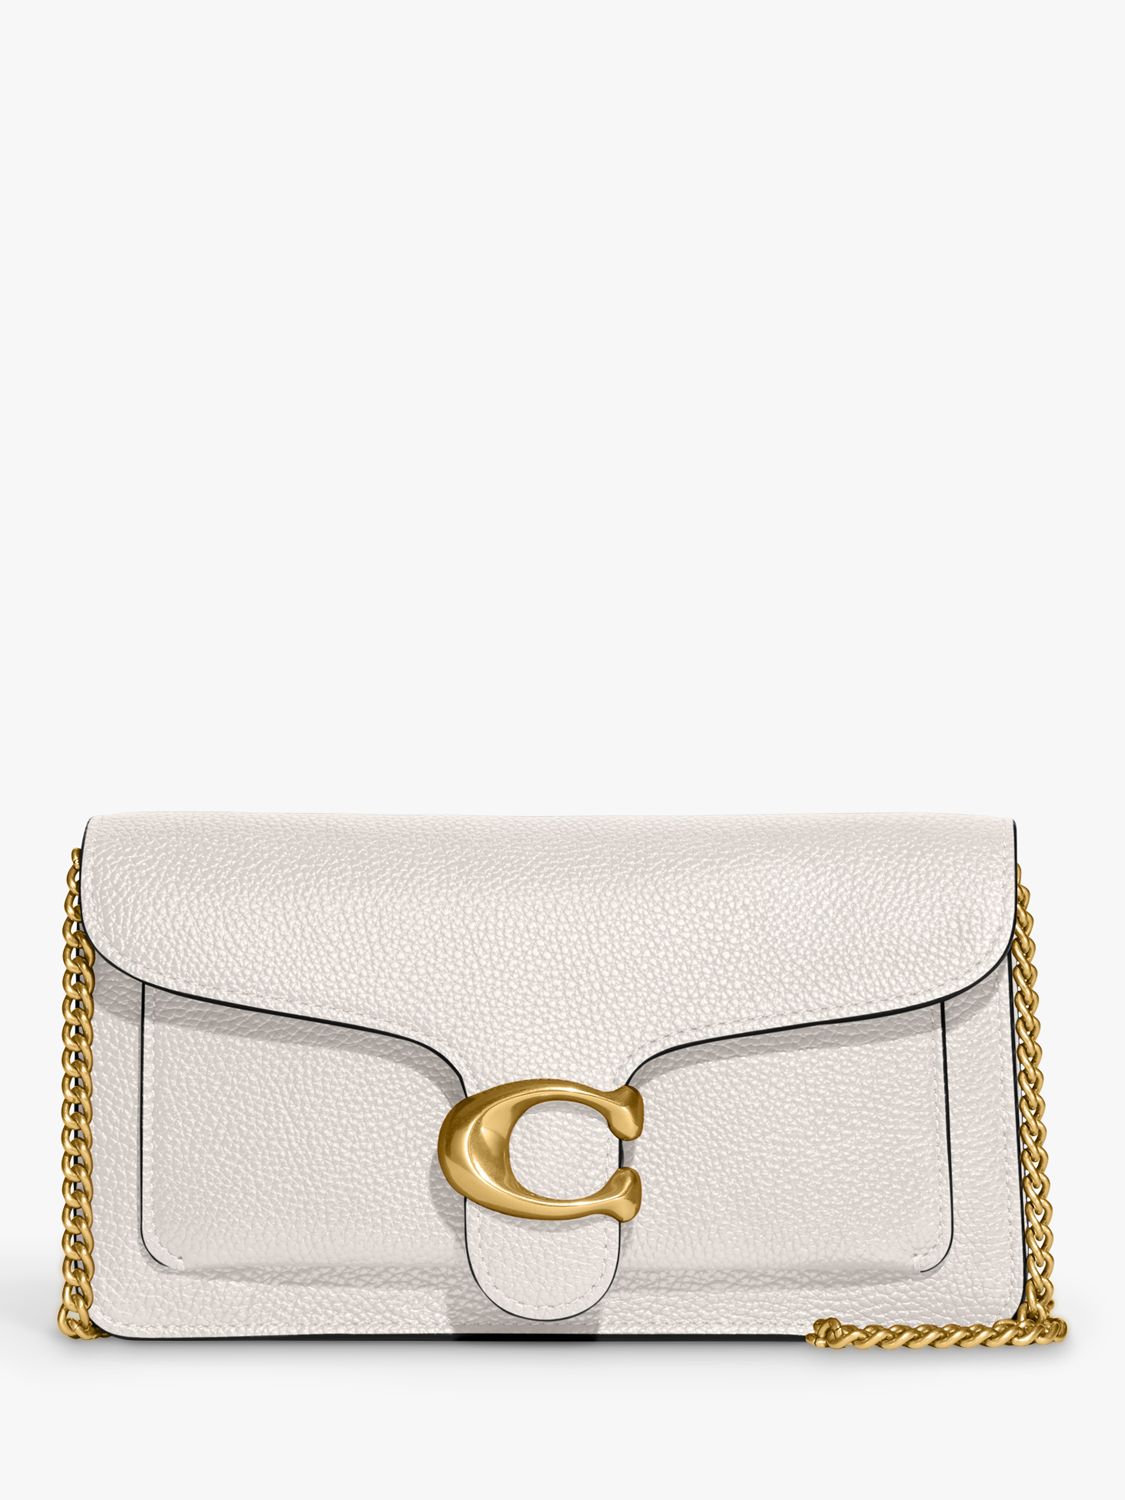 Coach Tabby Chain Leather Clutch Bag, Chalk at John Lewis & Partners